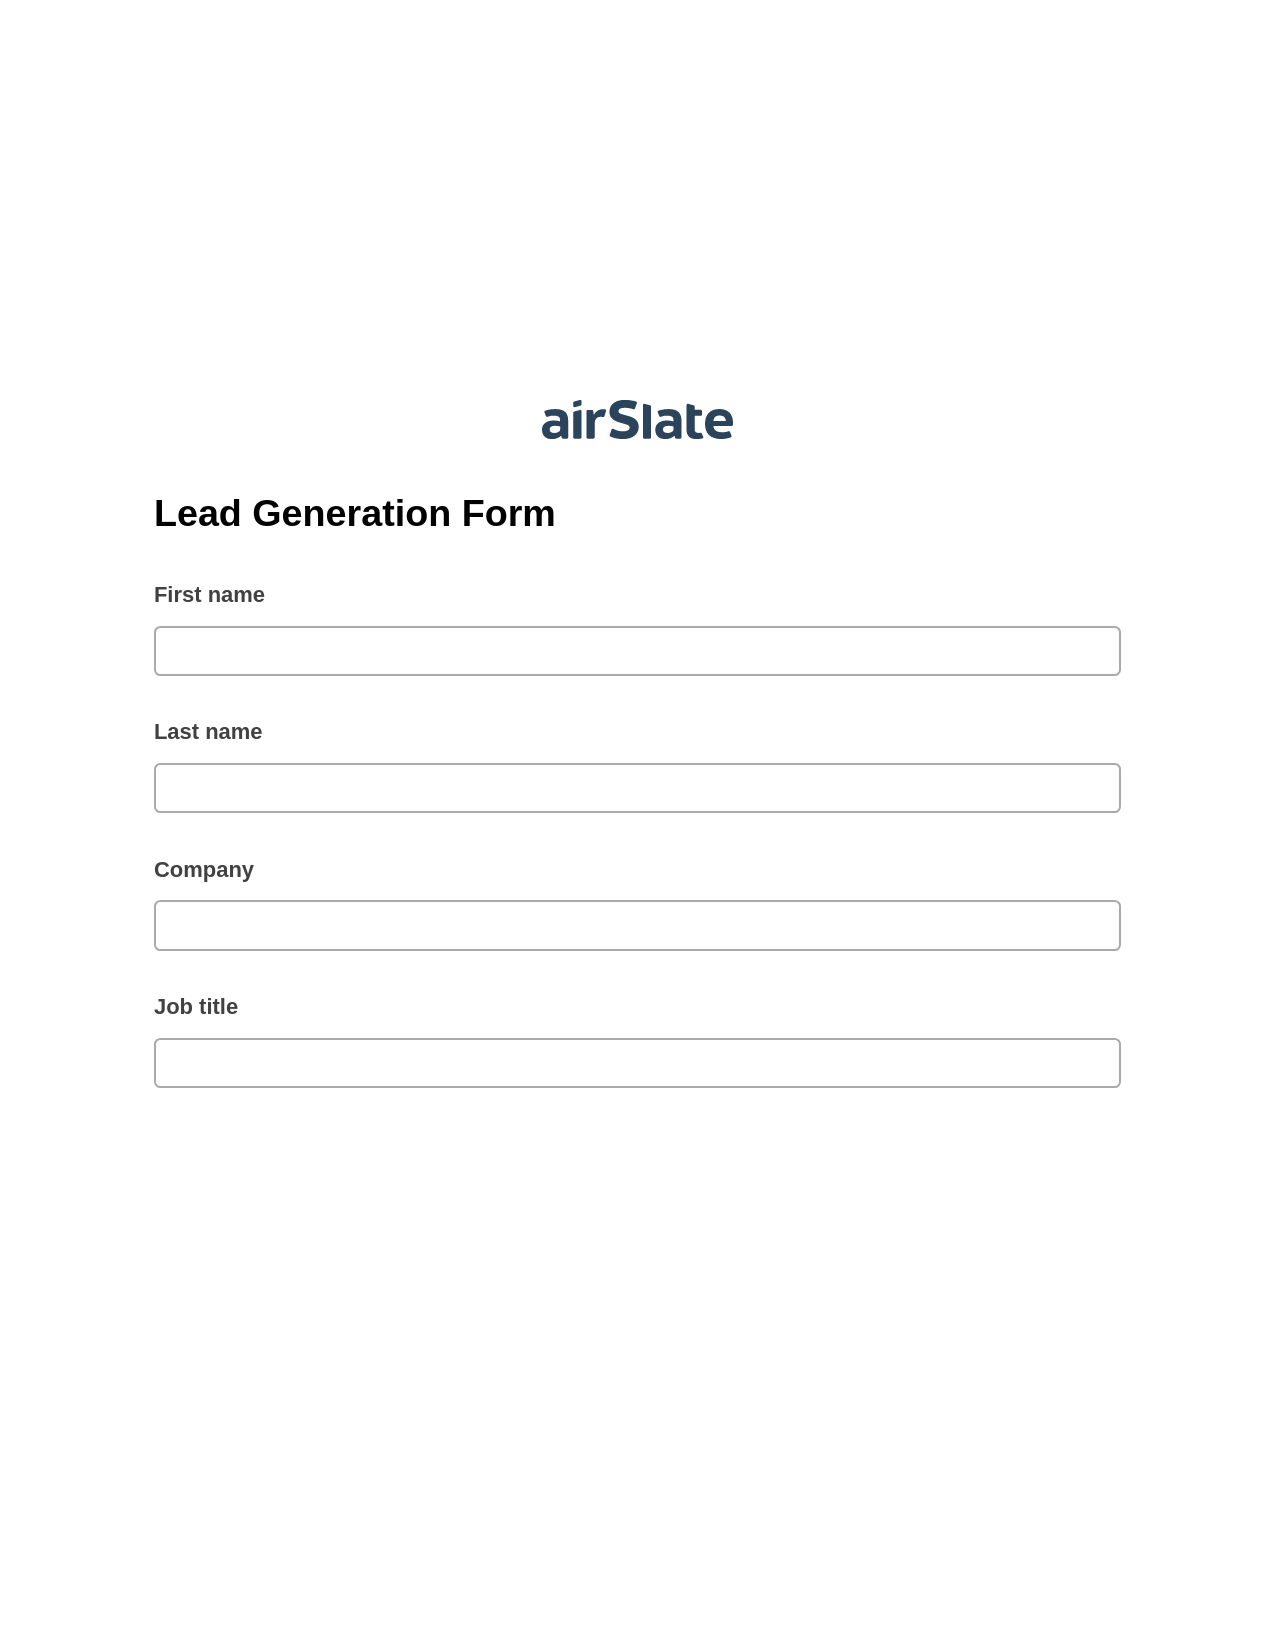 Lead Generation Form Pre-fill from Google Sheets Bot, Send a Slate with Roles Bot, Export to MySQL Bot